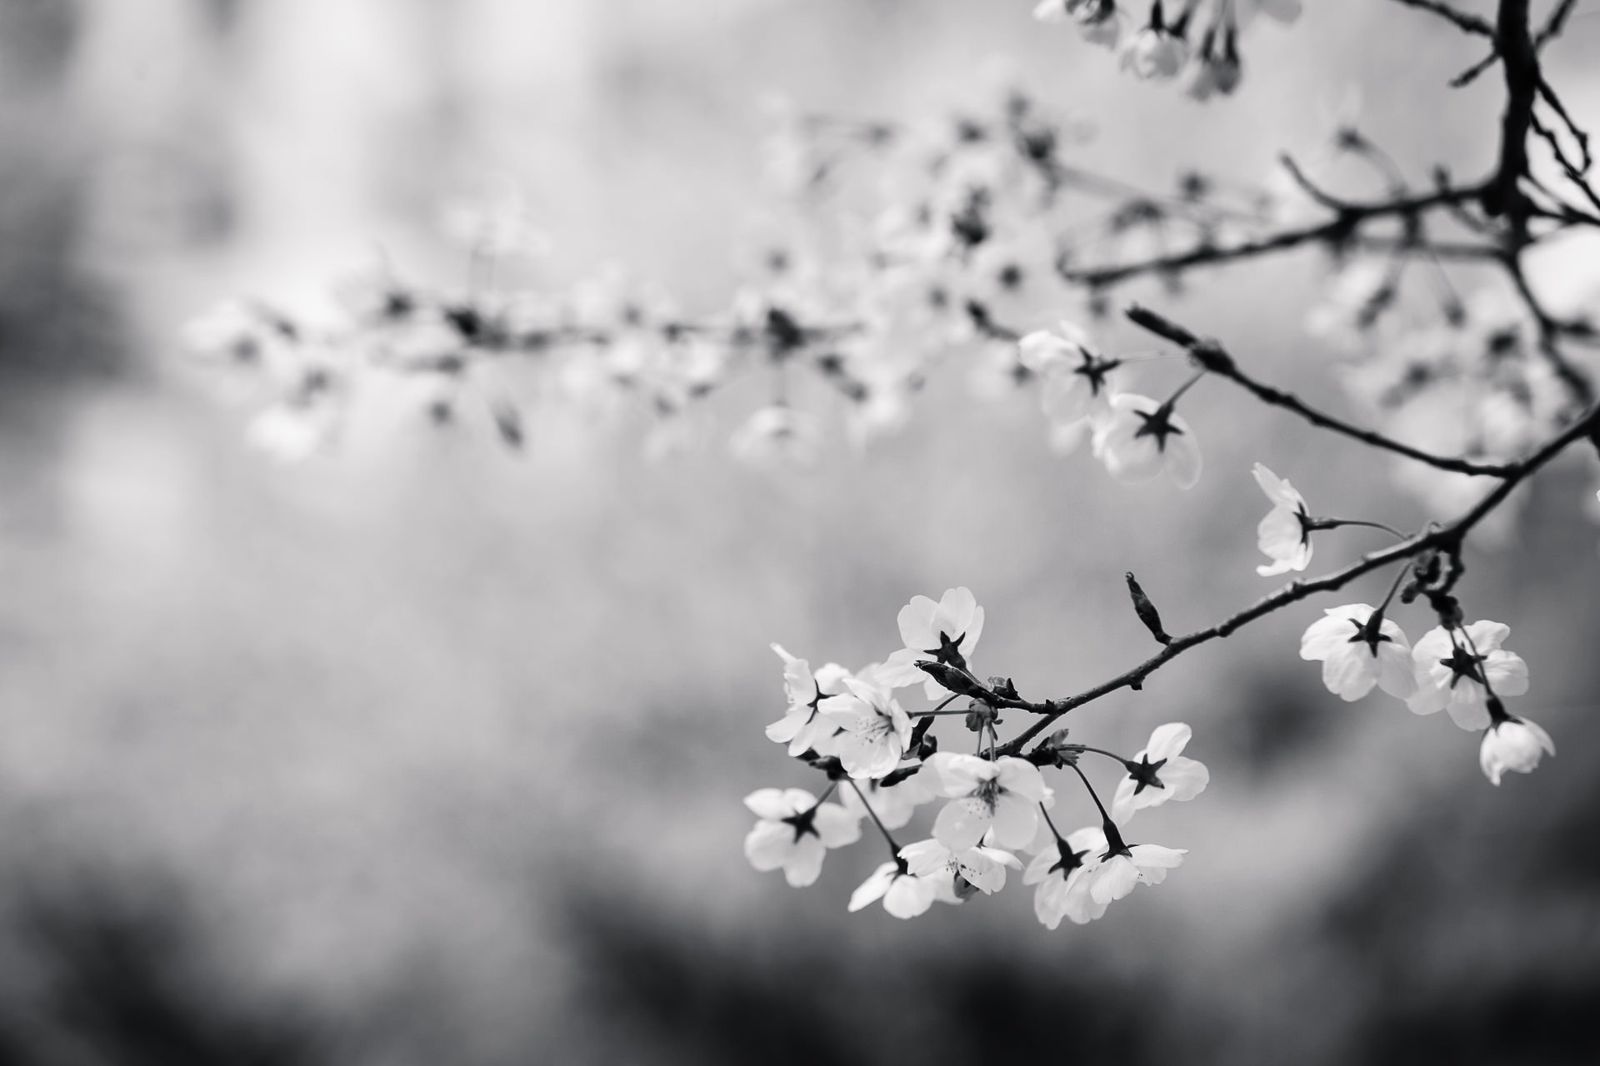 Black And White Flowers Wallpaper.com. Best High Quality Wallpaper